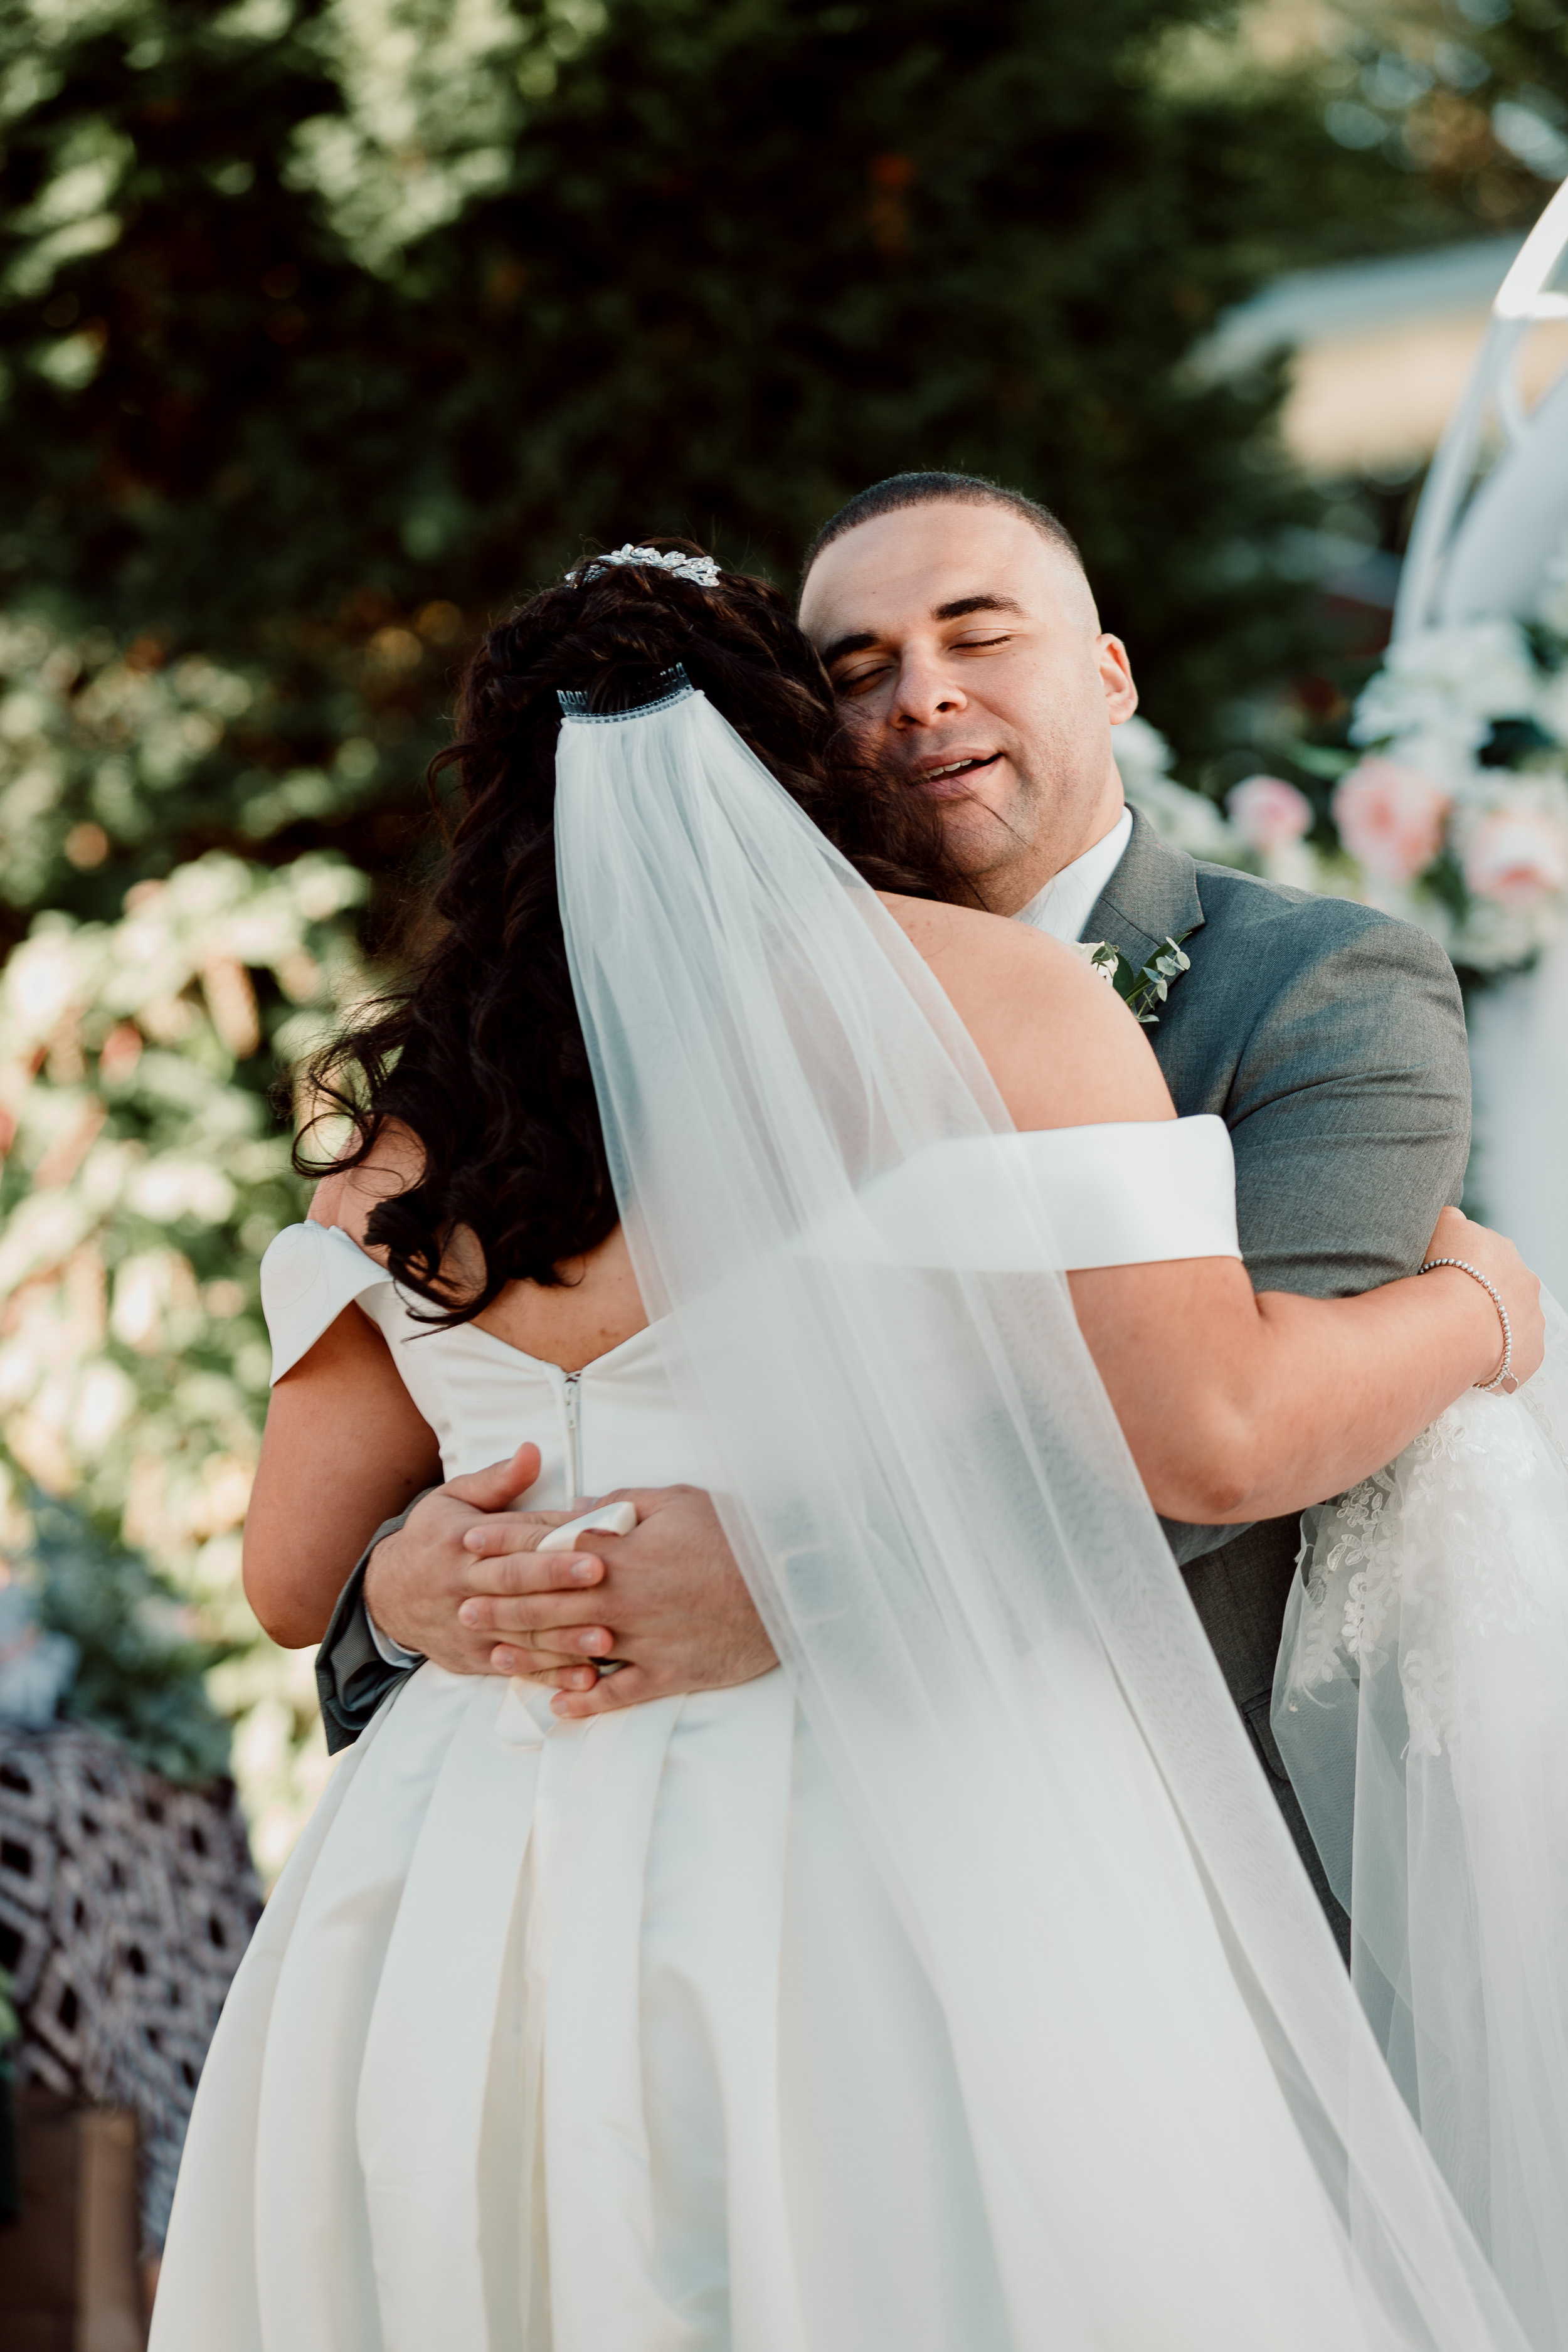 Sweet moments between bride and groom at Backyard Chicago Wedding | Emotional Chicago Wedding | Historic Downtown Riverside Wedding Photos | Chicago Wedding Photographer | Metra Station Wedding Photos | Small Weddings in Chicago | Intimate Elopements in Chicago